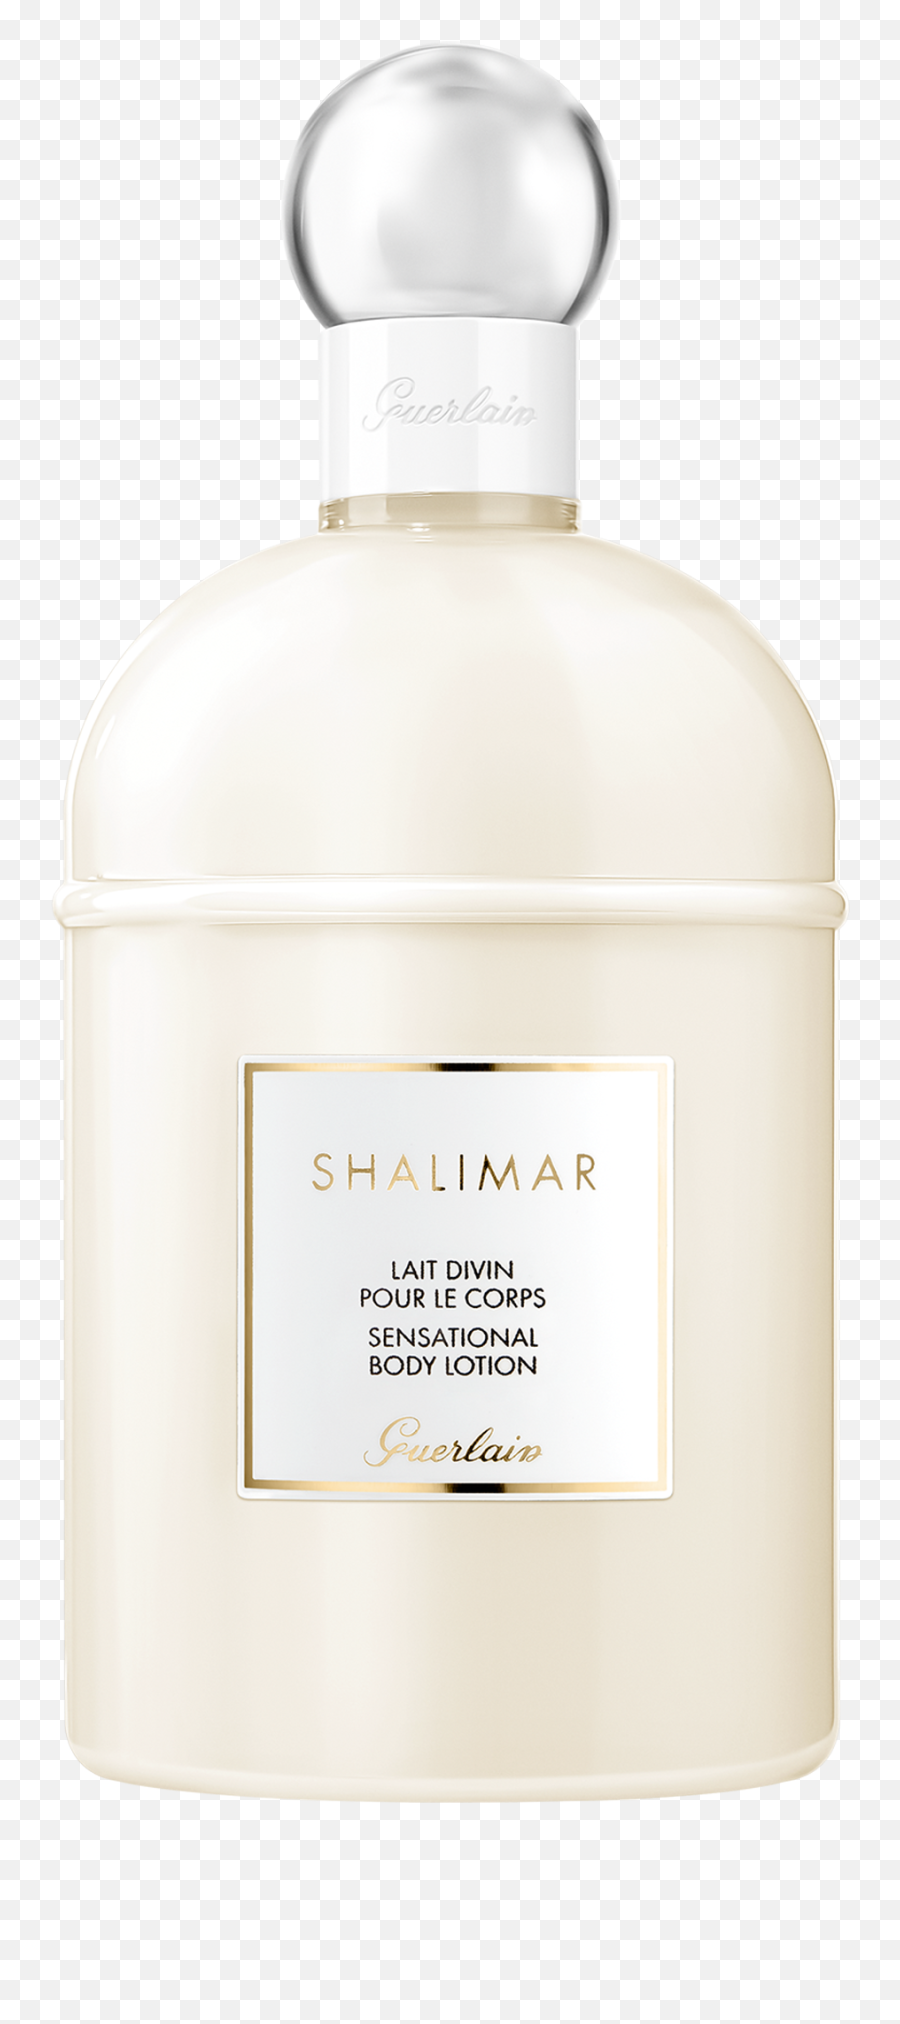 Shalimar Sensational Body Lotion Guerlain - Creed Aventus Lotion Png,Lotion Png